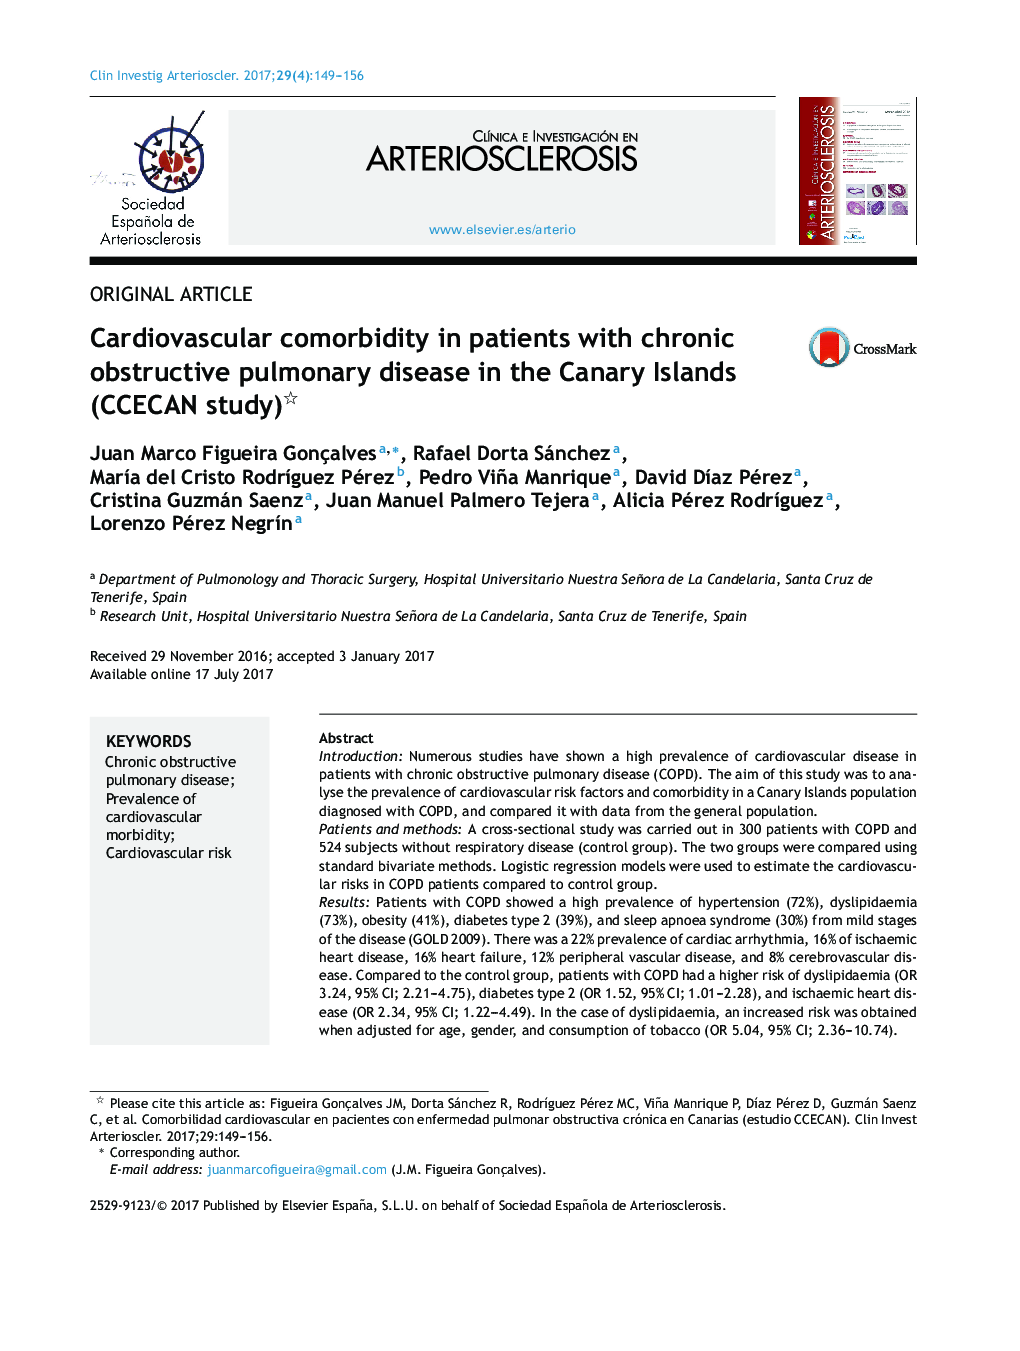 Cardiovascular comorbidity in patients with chronic obstructive pulmonary disease in the Canary Islands (CCECAN study)